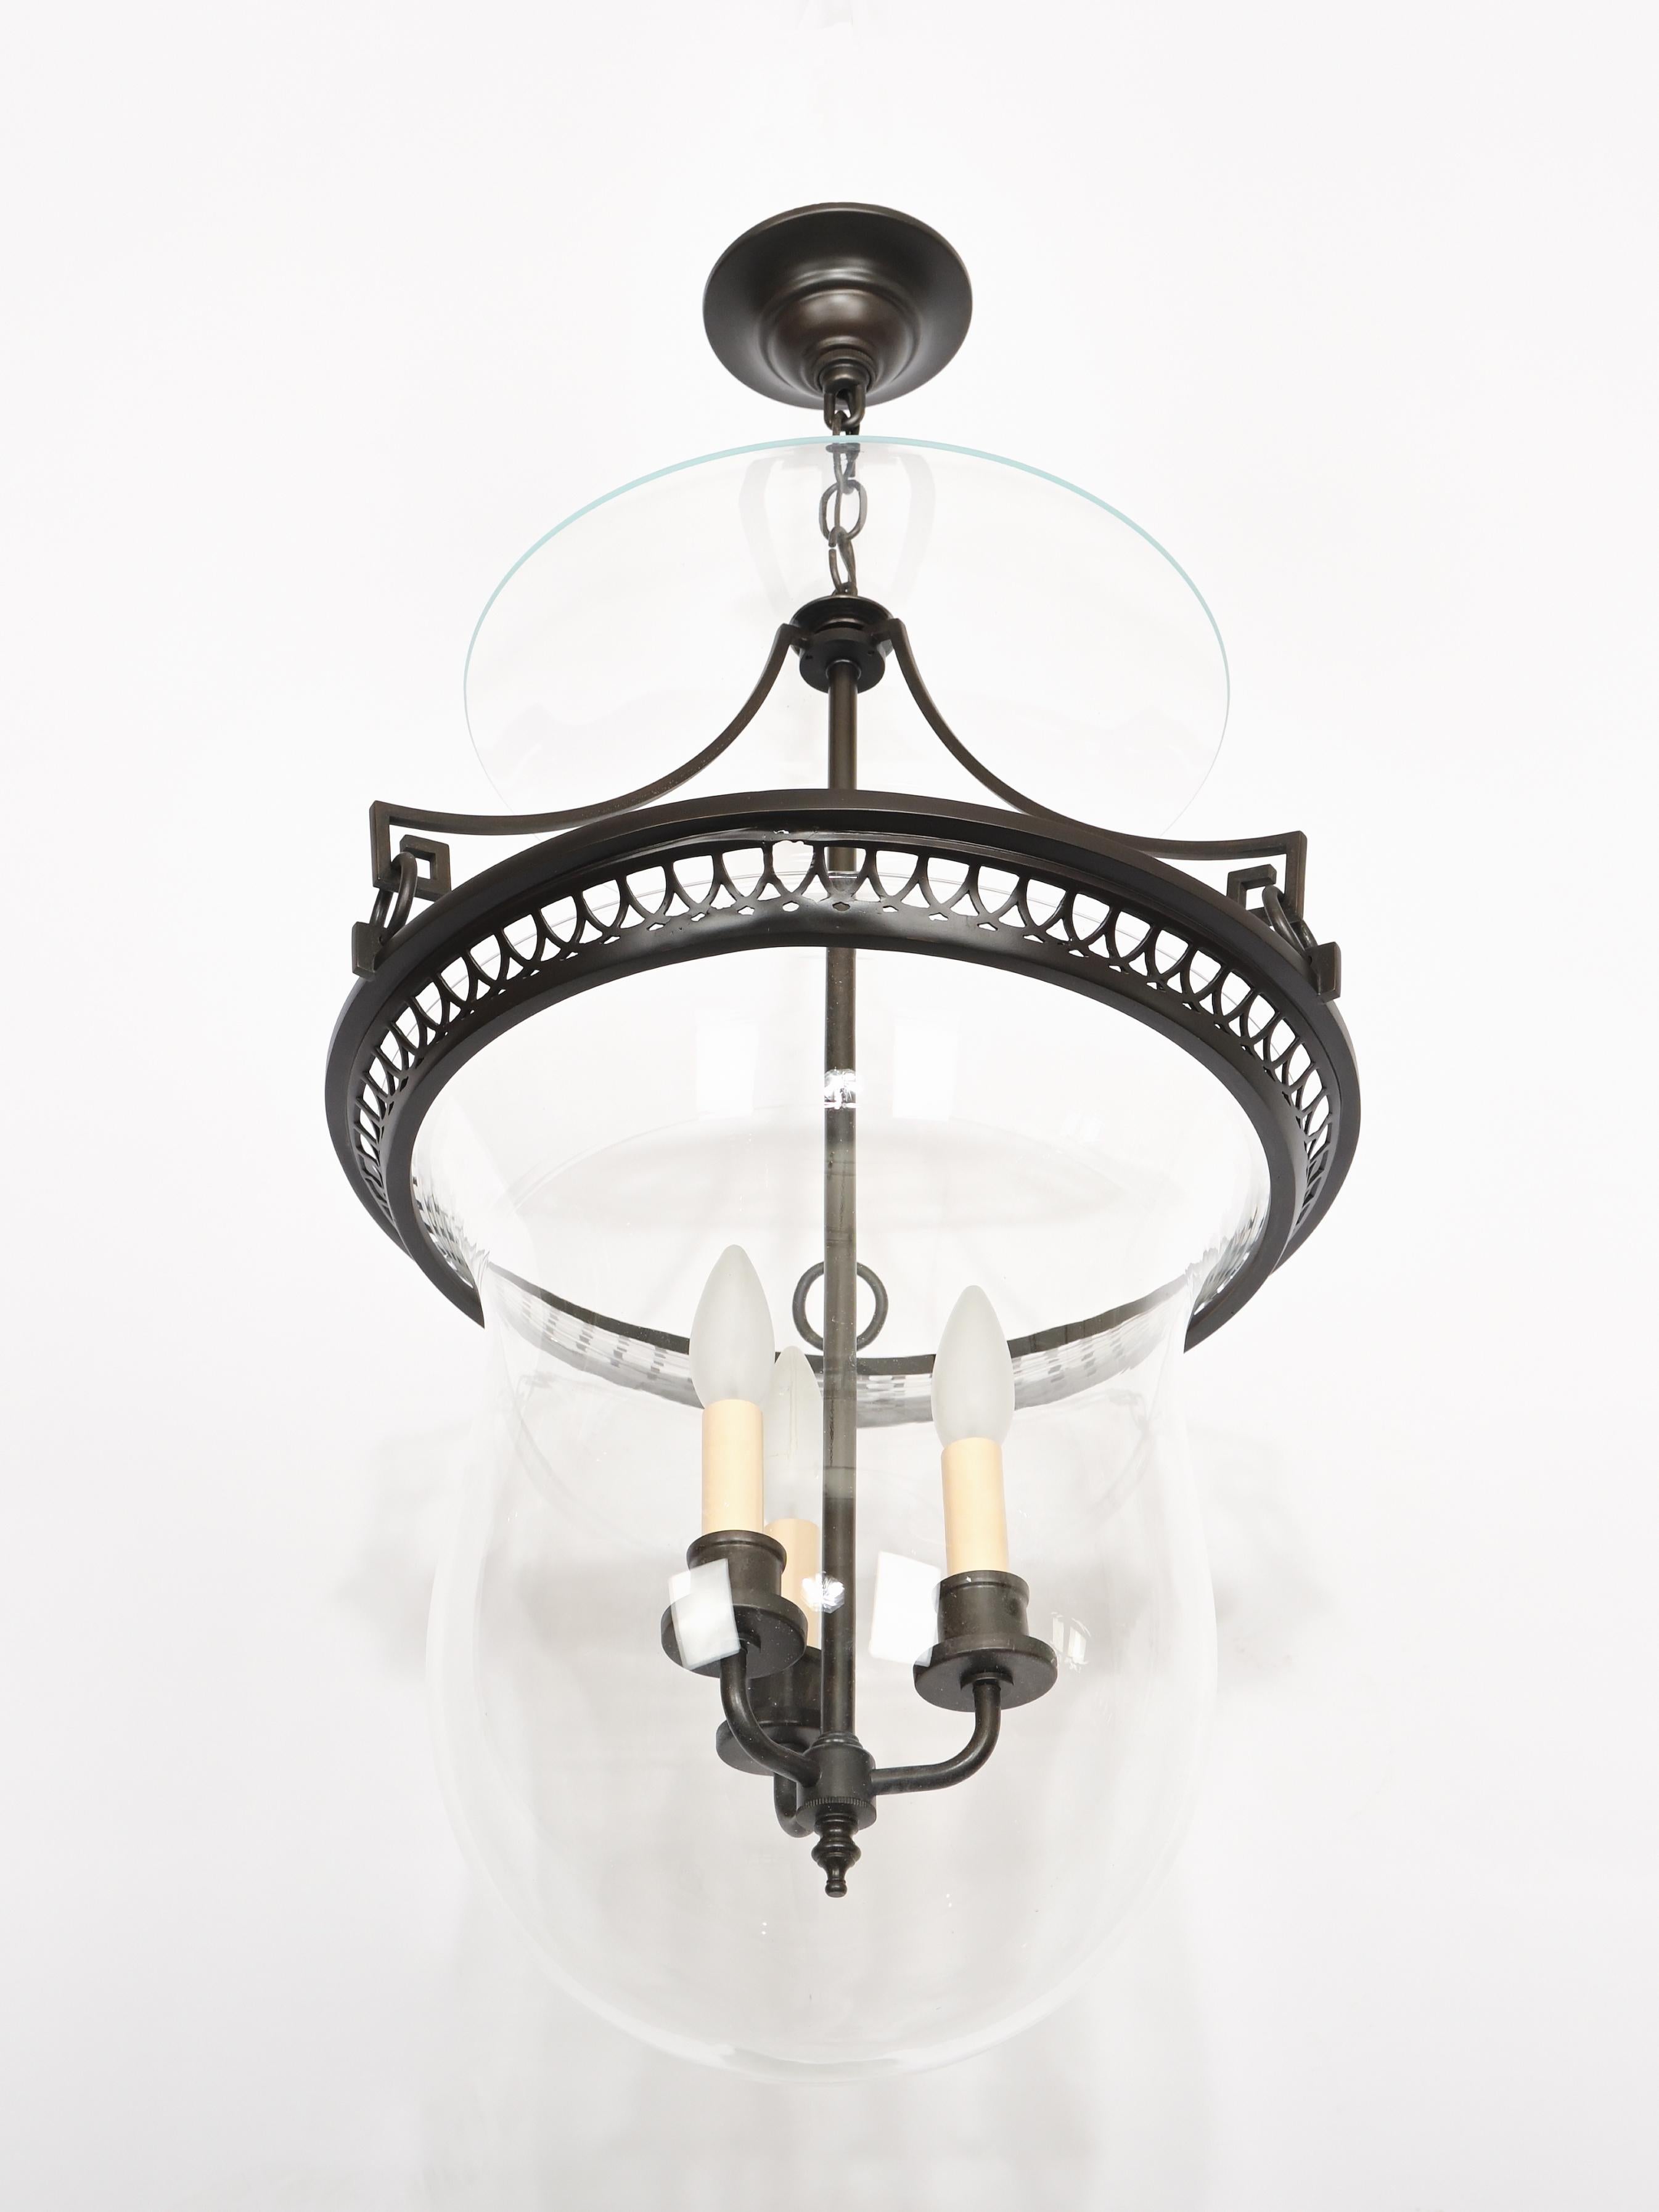 A custom ceiling lantern featuring darkened bronze Greek fret motifs and ornate frieze comprising the frame, with hand blown glass bell and dish, fitted with three light bronze cluster.

With three medium sockets (maximum total wattage 300 watts).